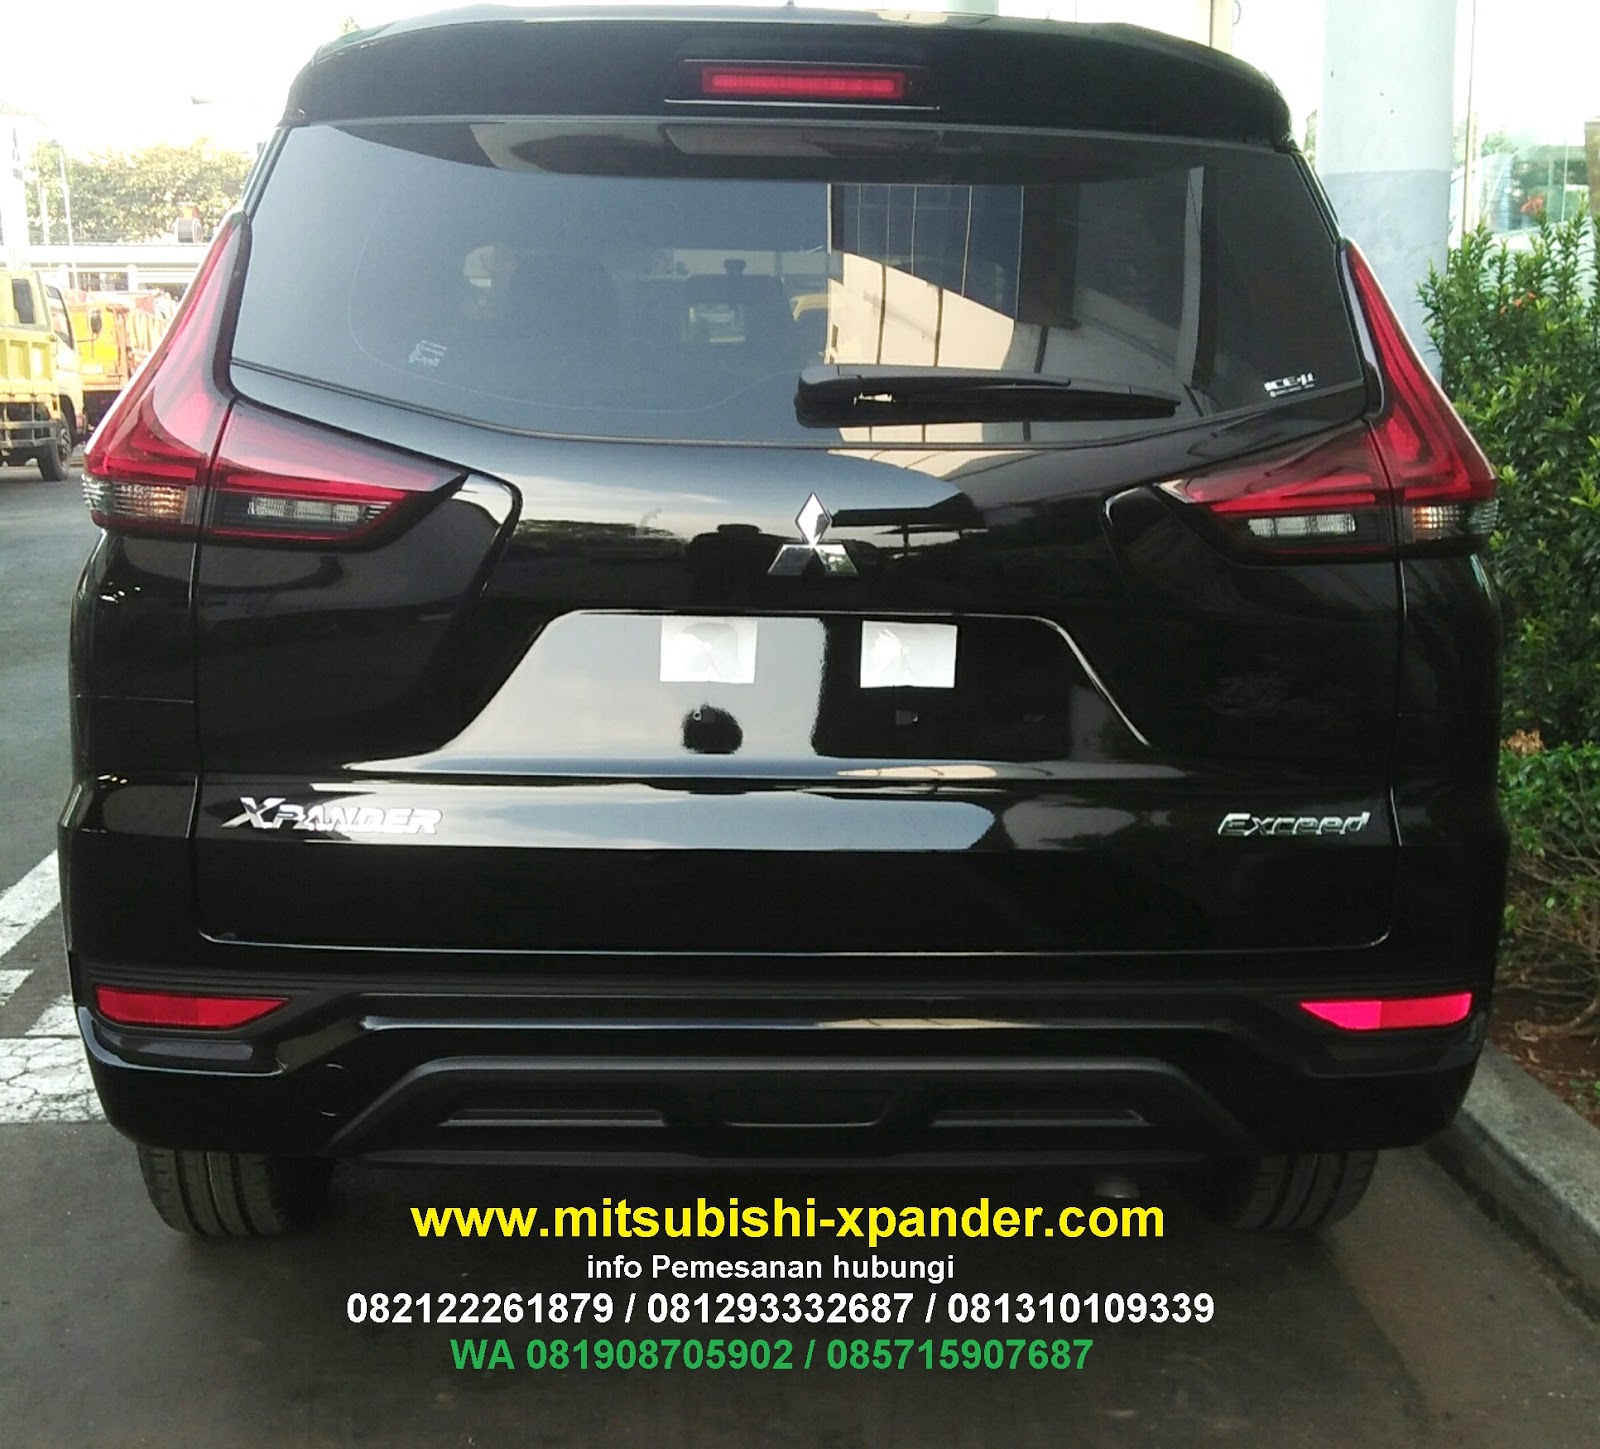 Gambar Mobil  Xpander  Exceed Ottomania86